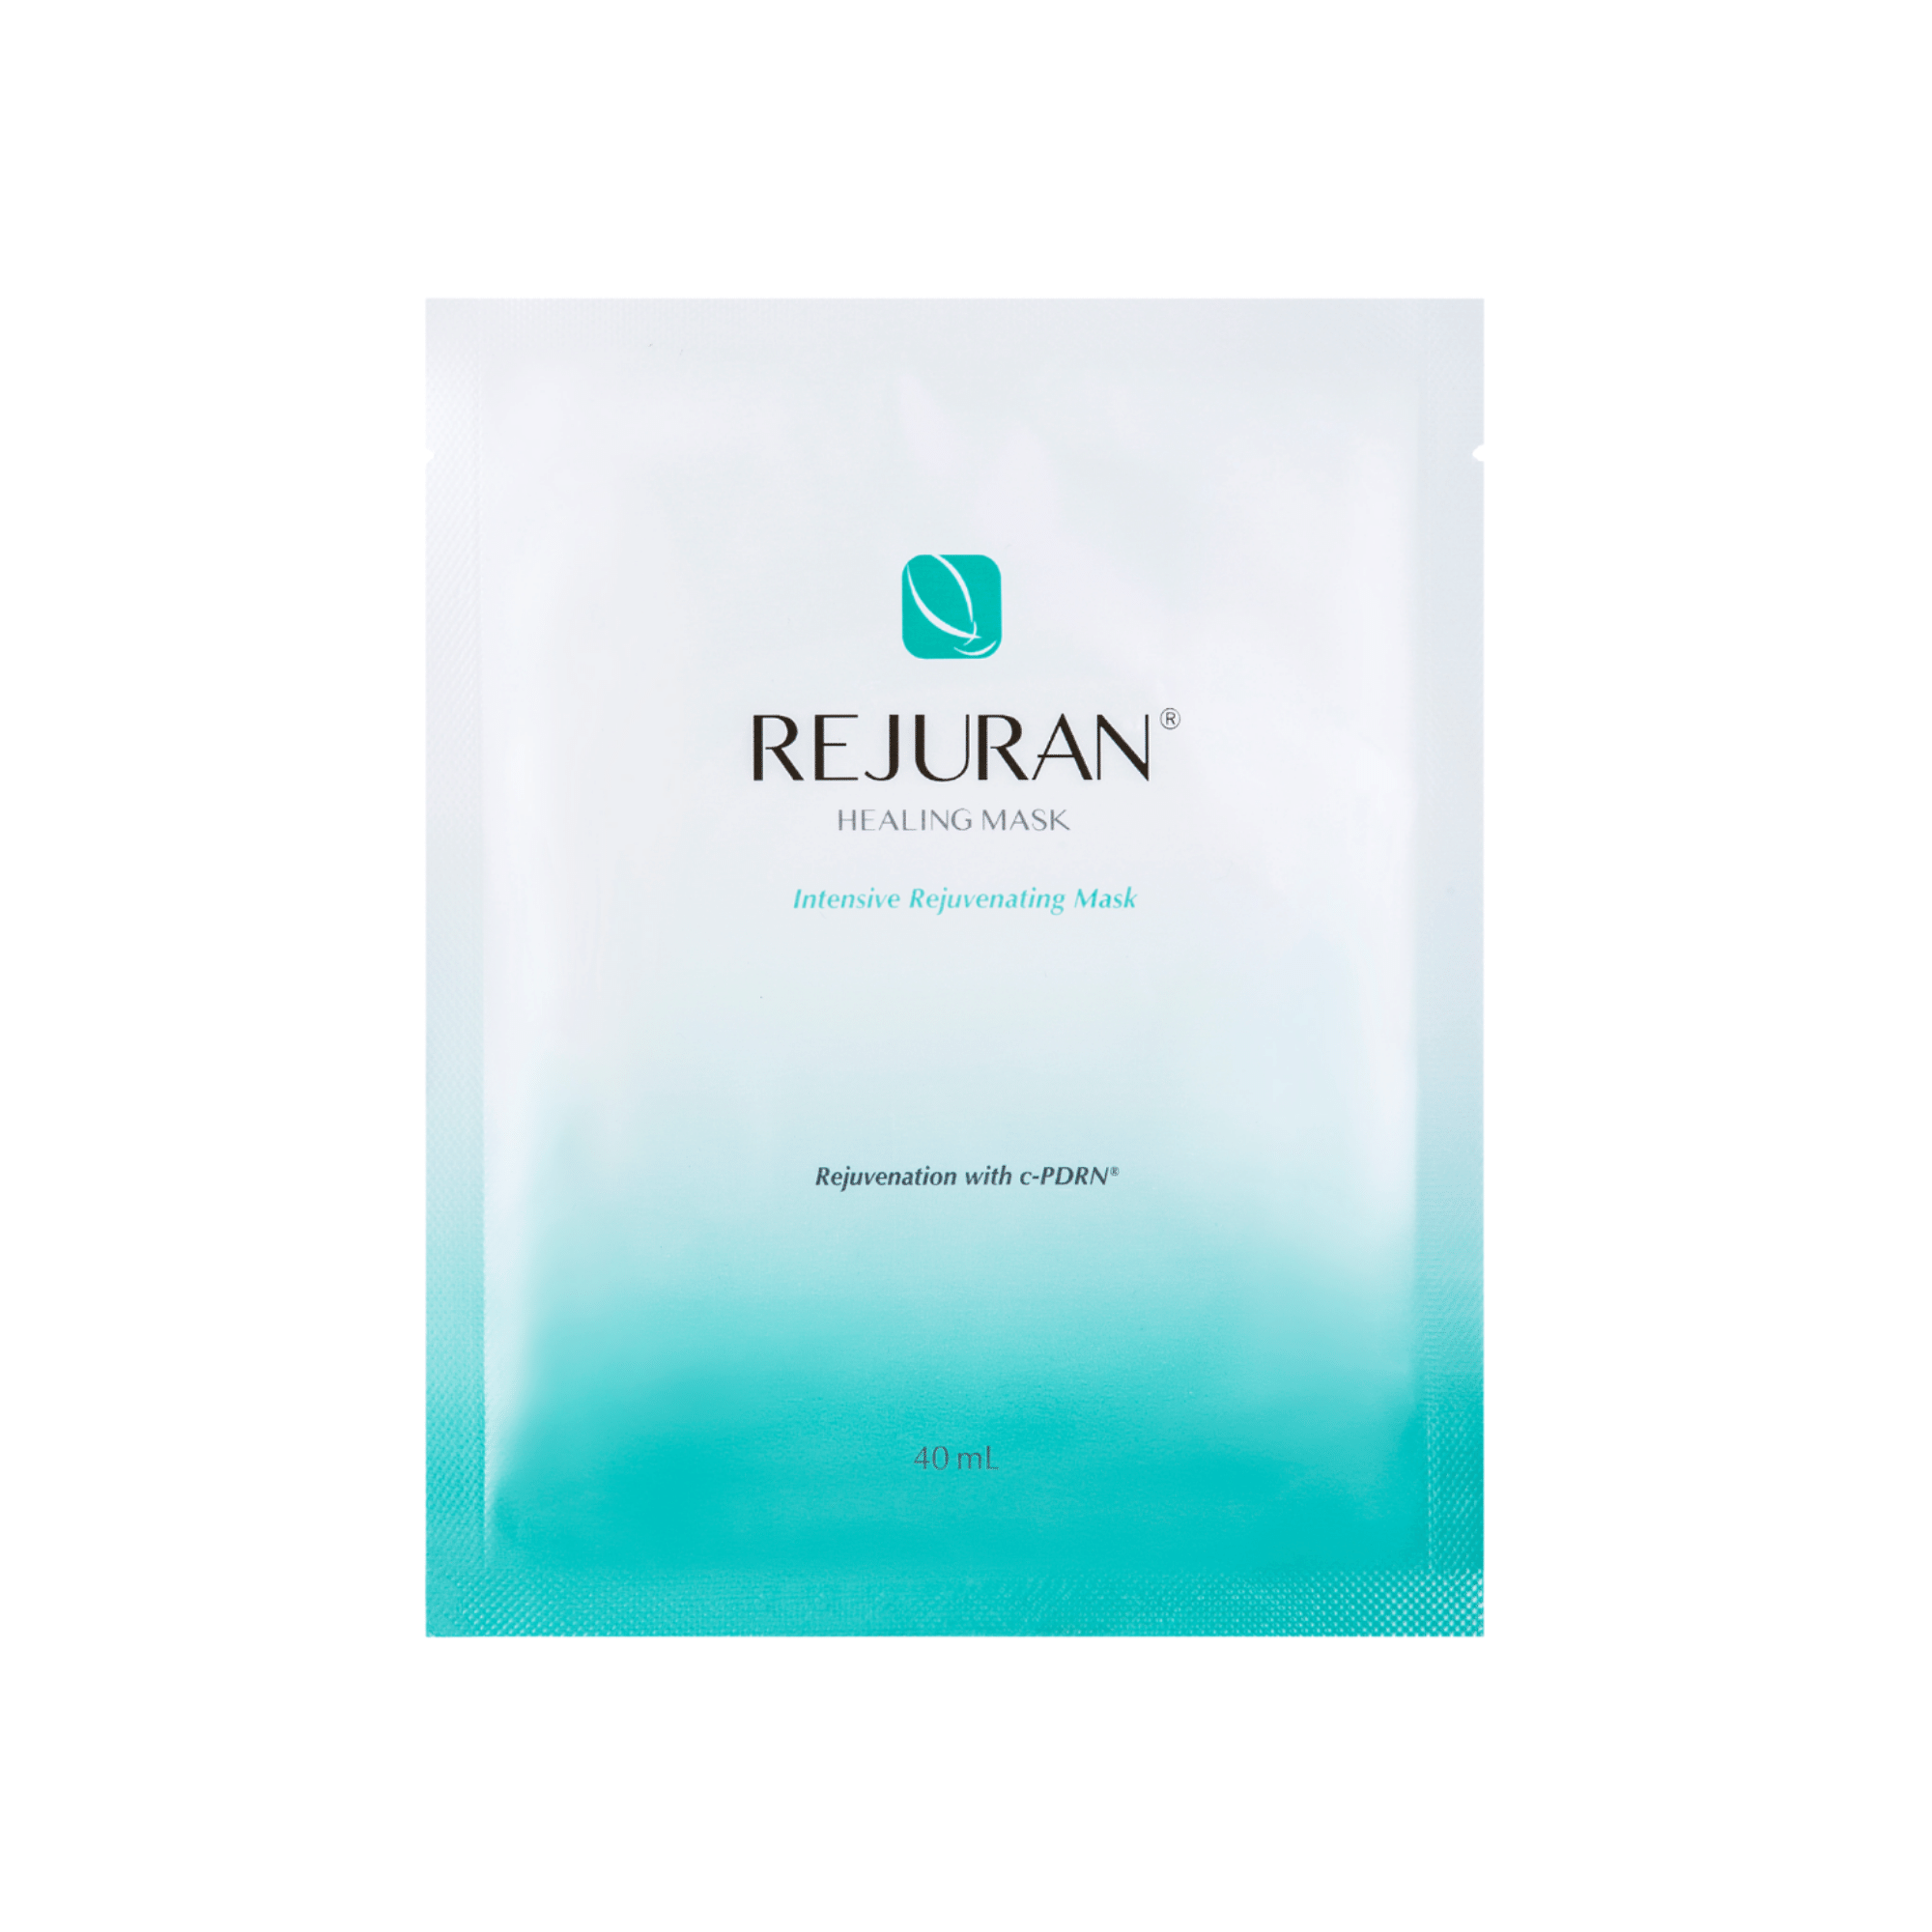 rejuran malaysia healing mask infused with the active ingredient adheres closed to your skin relieving sensitive skin after facial treatment and external stressors